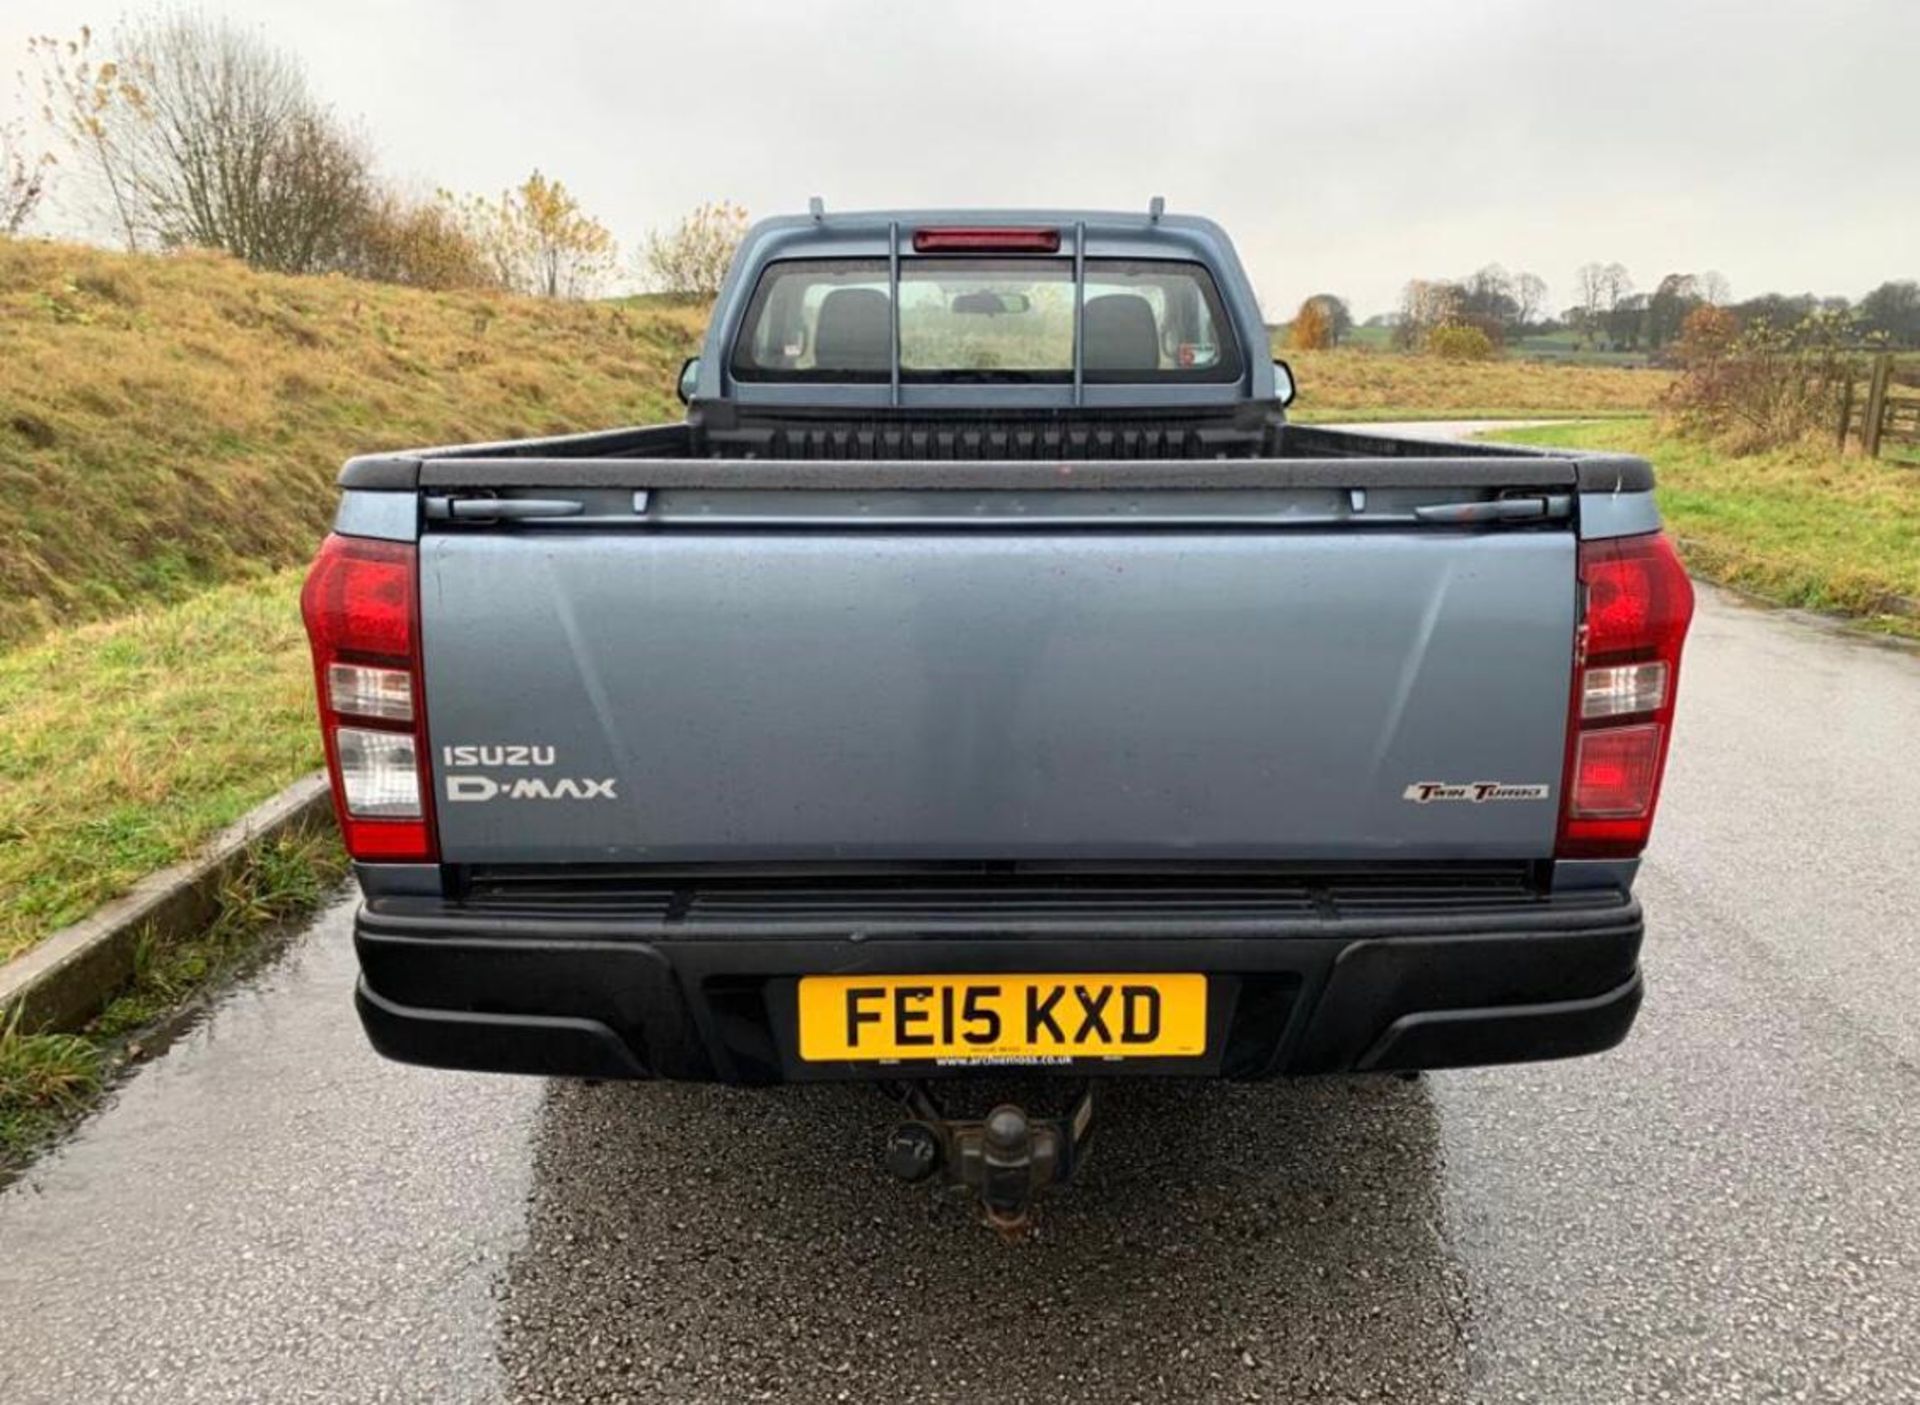 2015/15 REG ISUZU D-MAX S/C TWIN TURBO 4X4 TD 2.5 DIESEL PICK-UP, SHOWING 0 FORMER KEEPERS *NO VAT* - Image 4 of 10